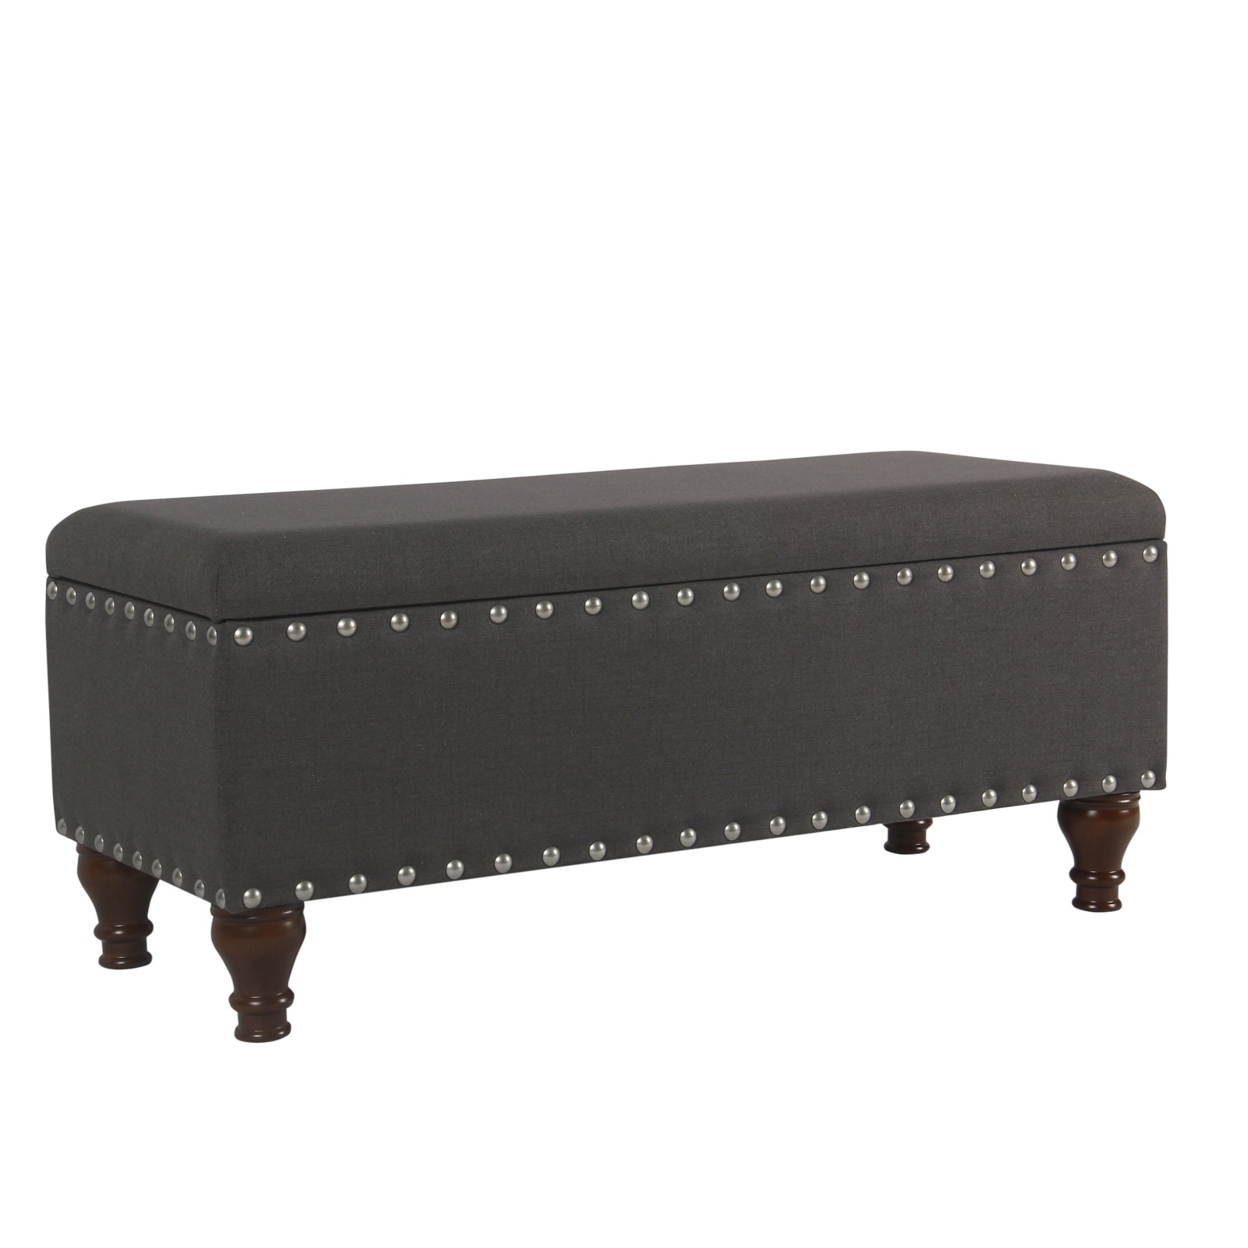 Fabric Upholstered Wooden Storage Bench With Nail Head Trim, Large, Dark Gray And Brown- Saltoro Sherpi